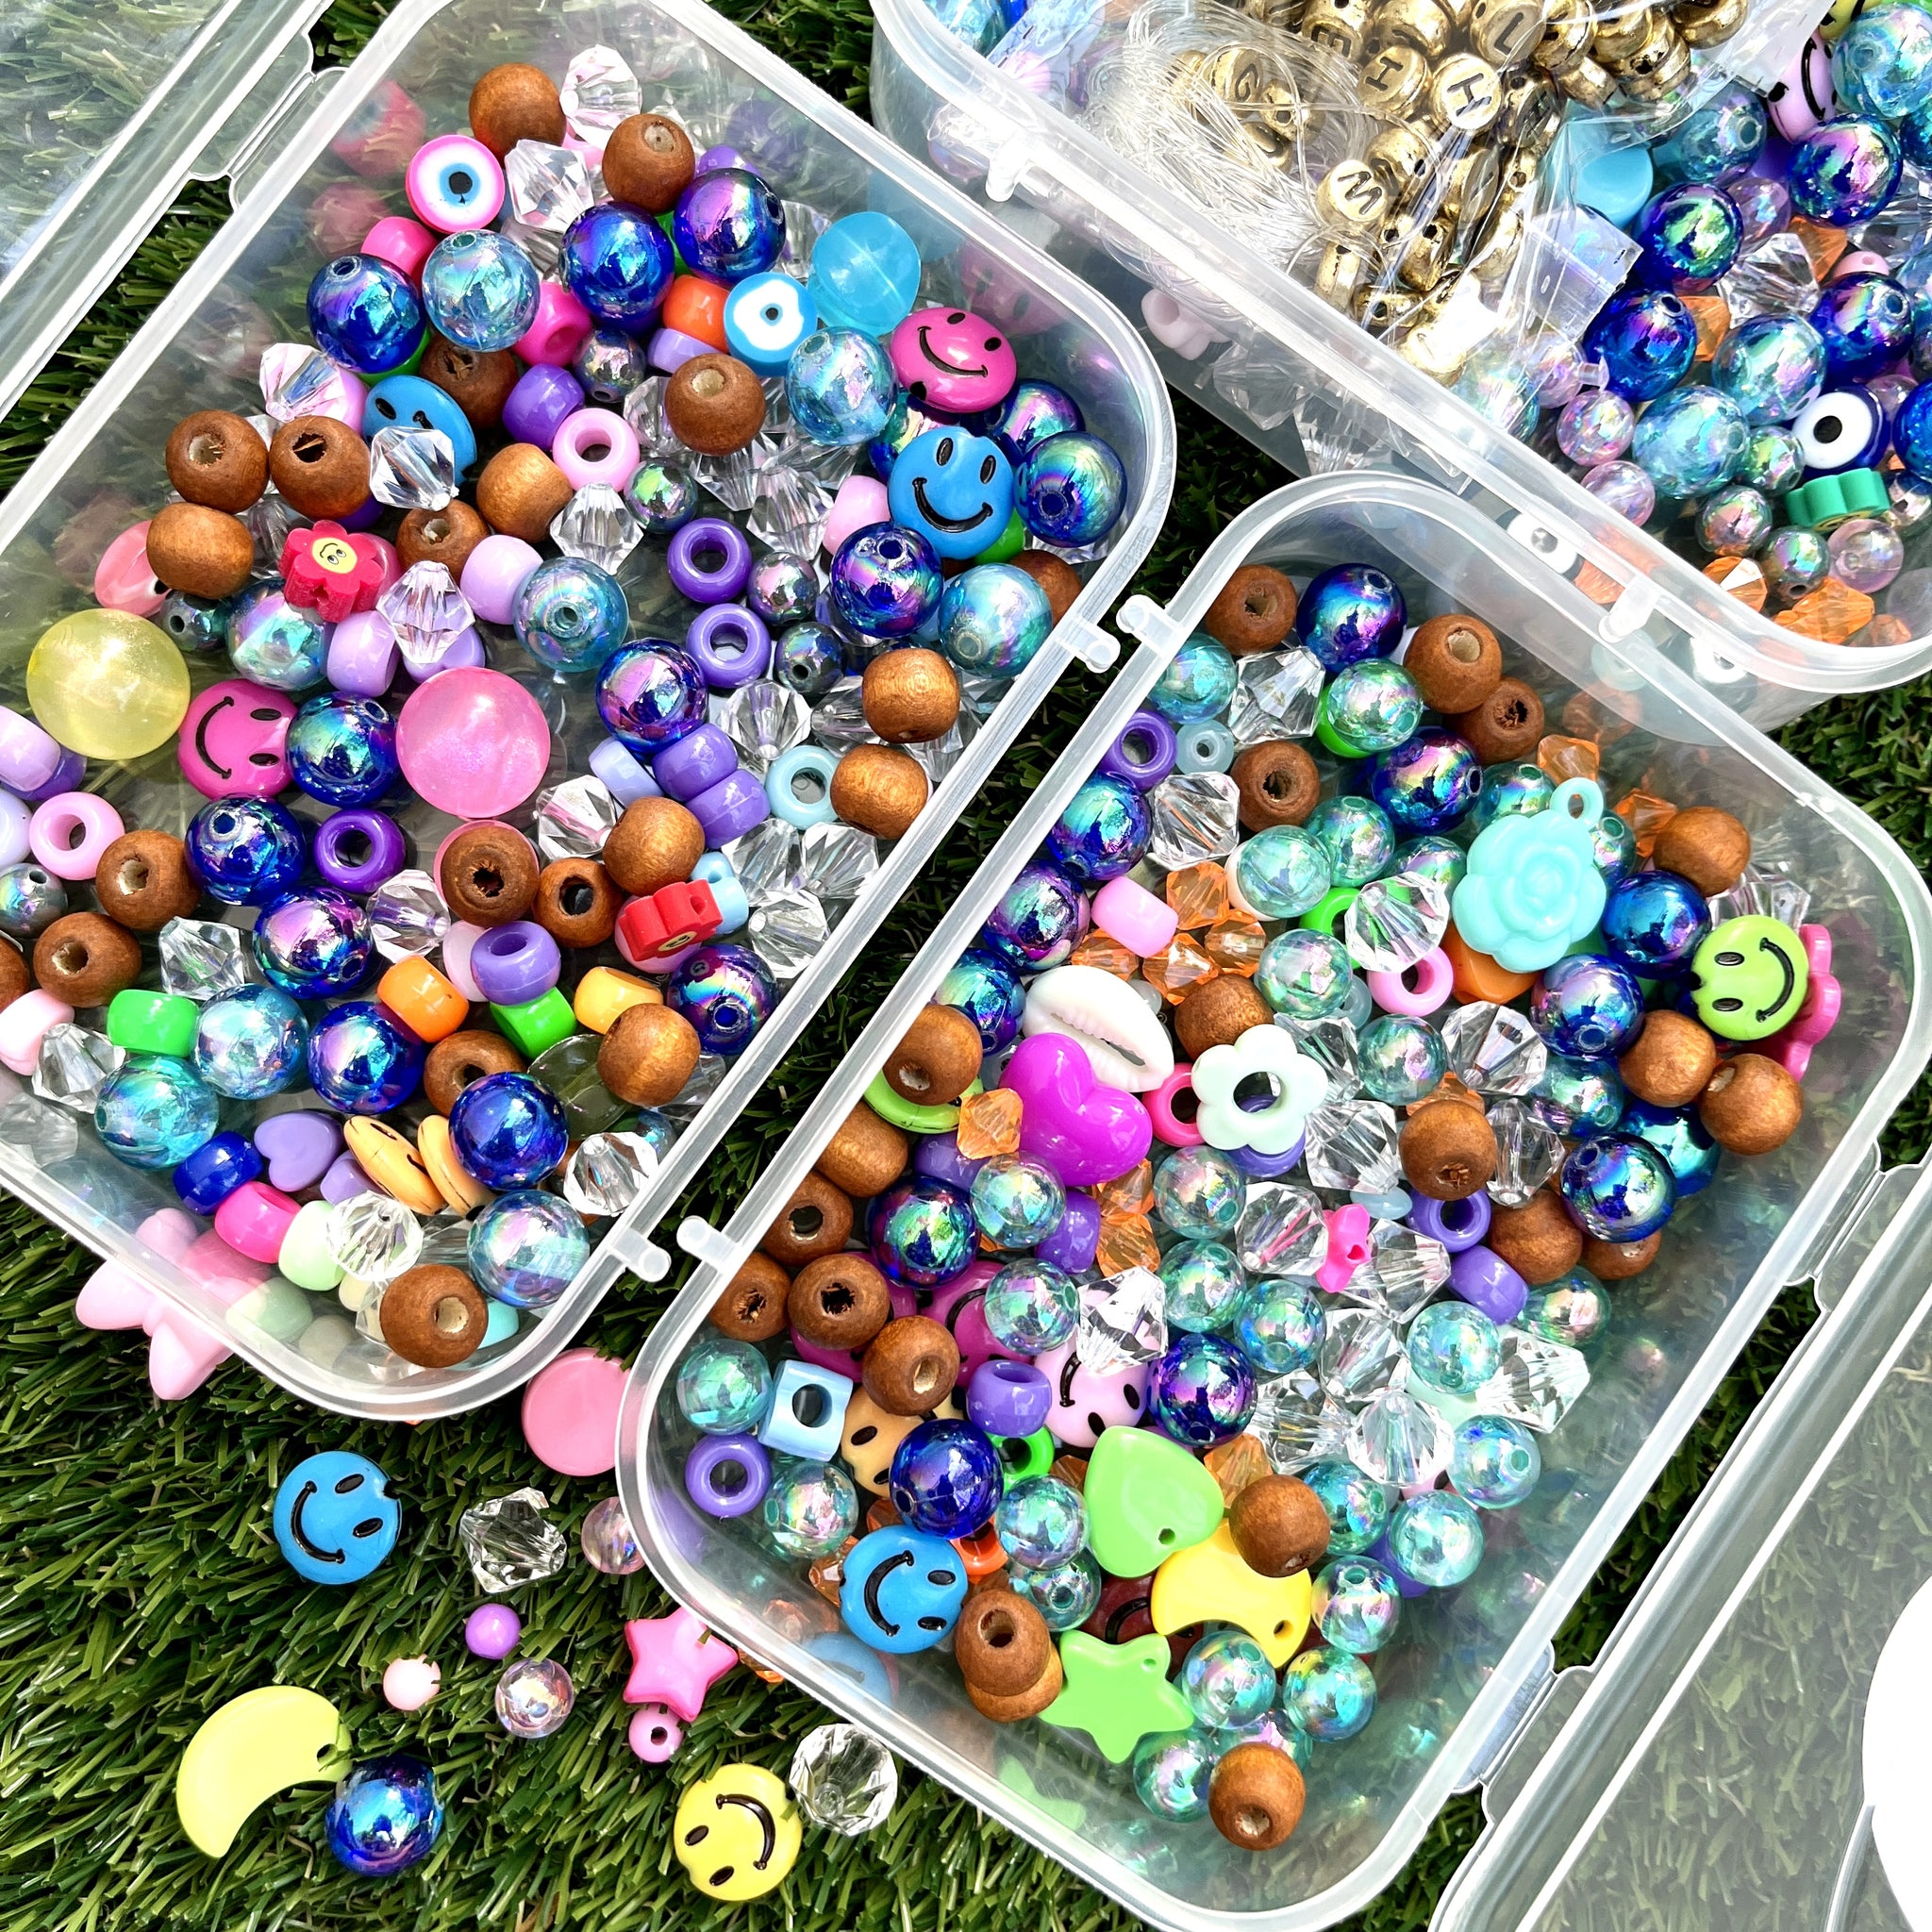 BYOB Kits (Build Your Own Beads) – Lunareign